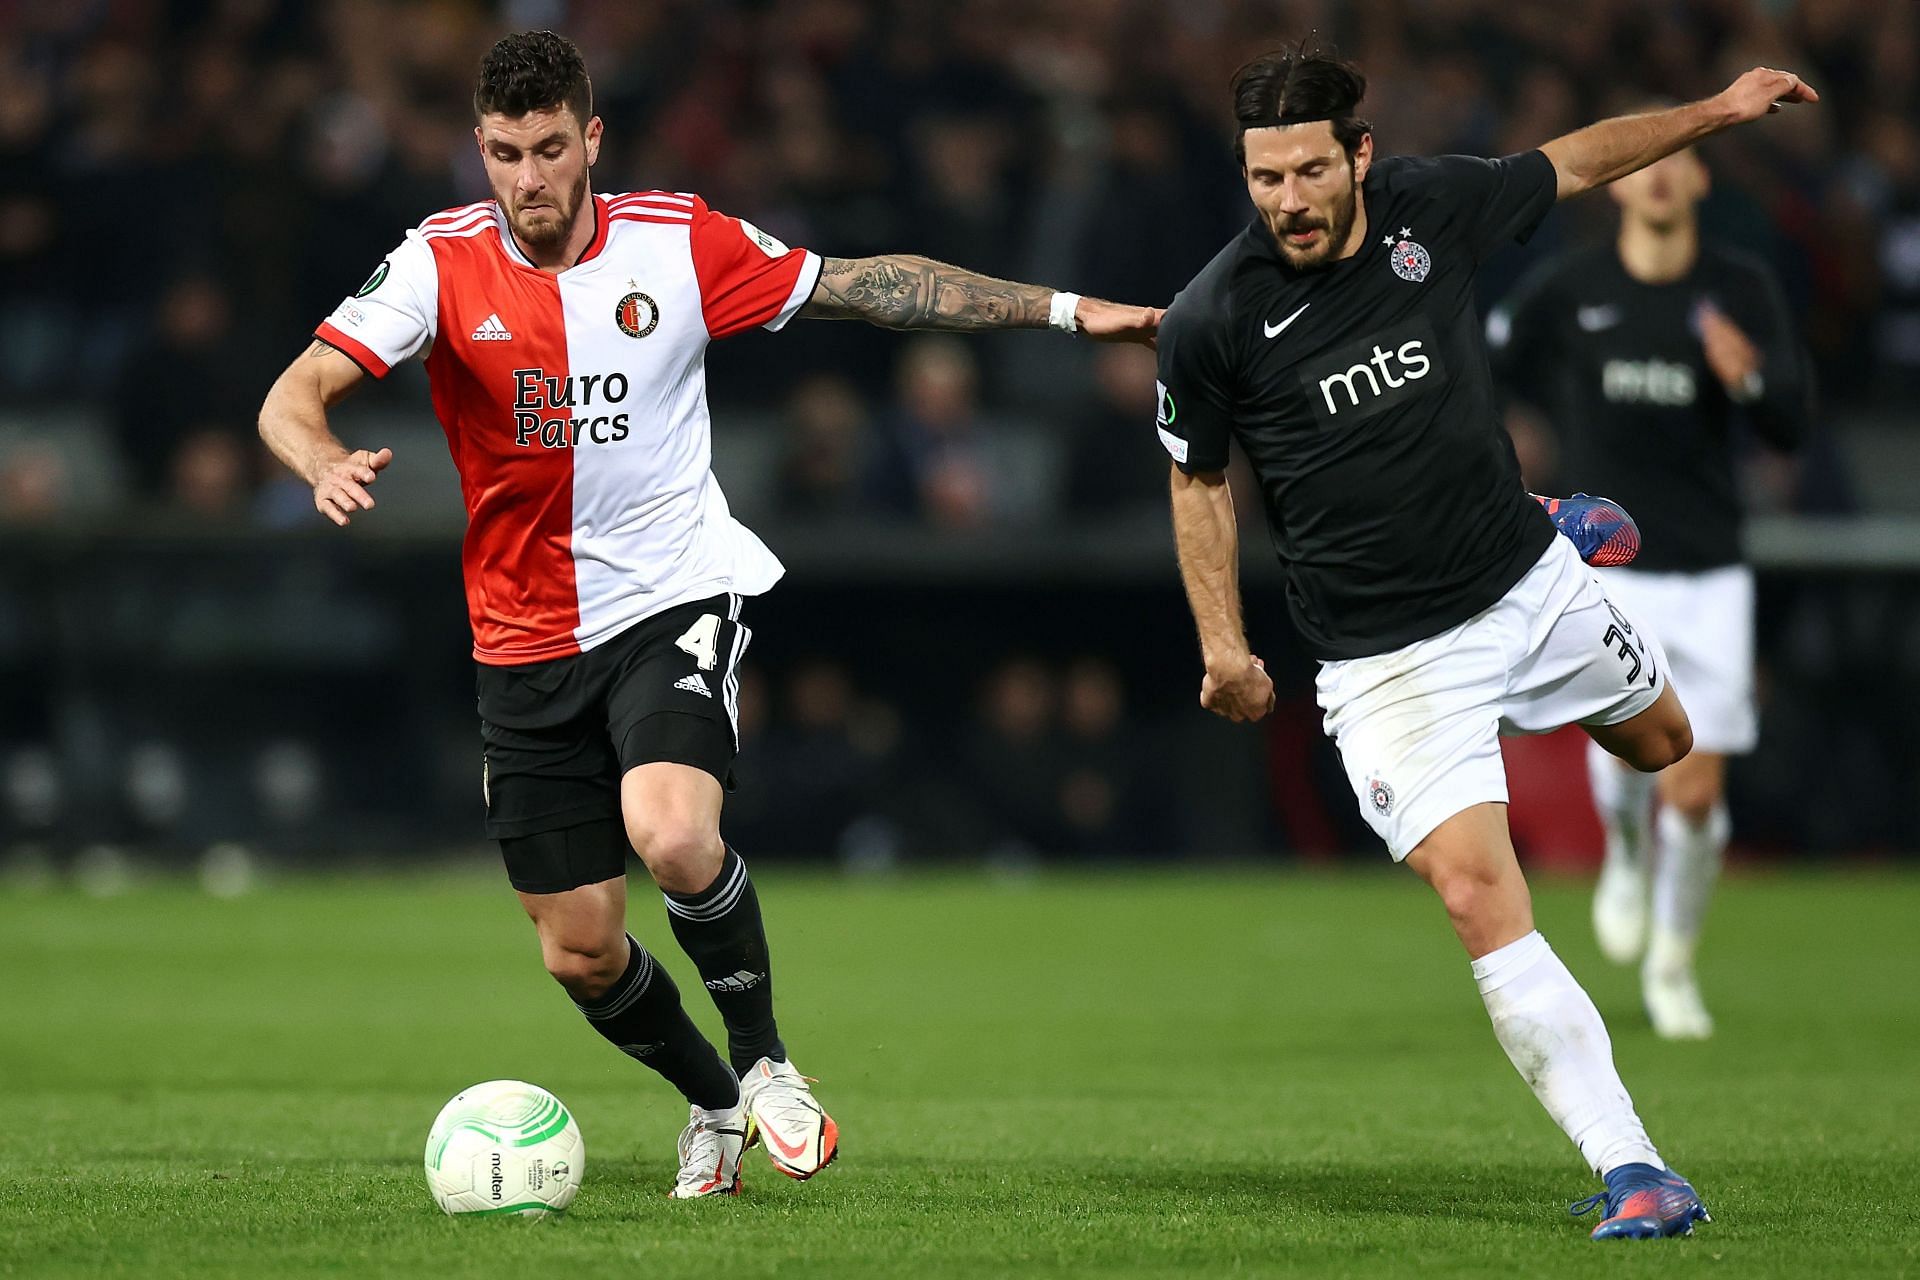 Feyenoord v Partizan in UEFA Europa Conference League action